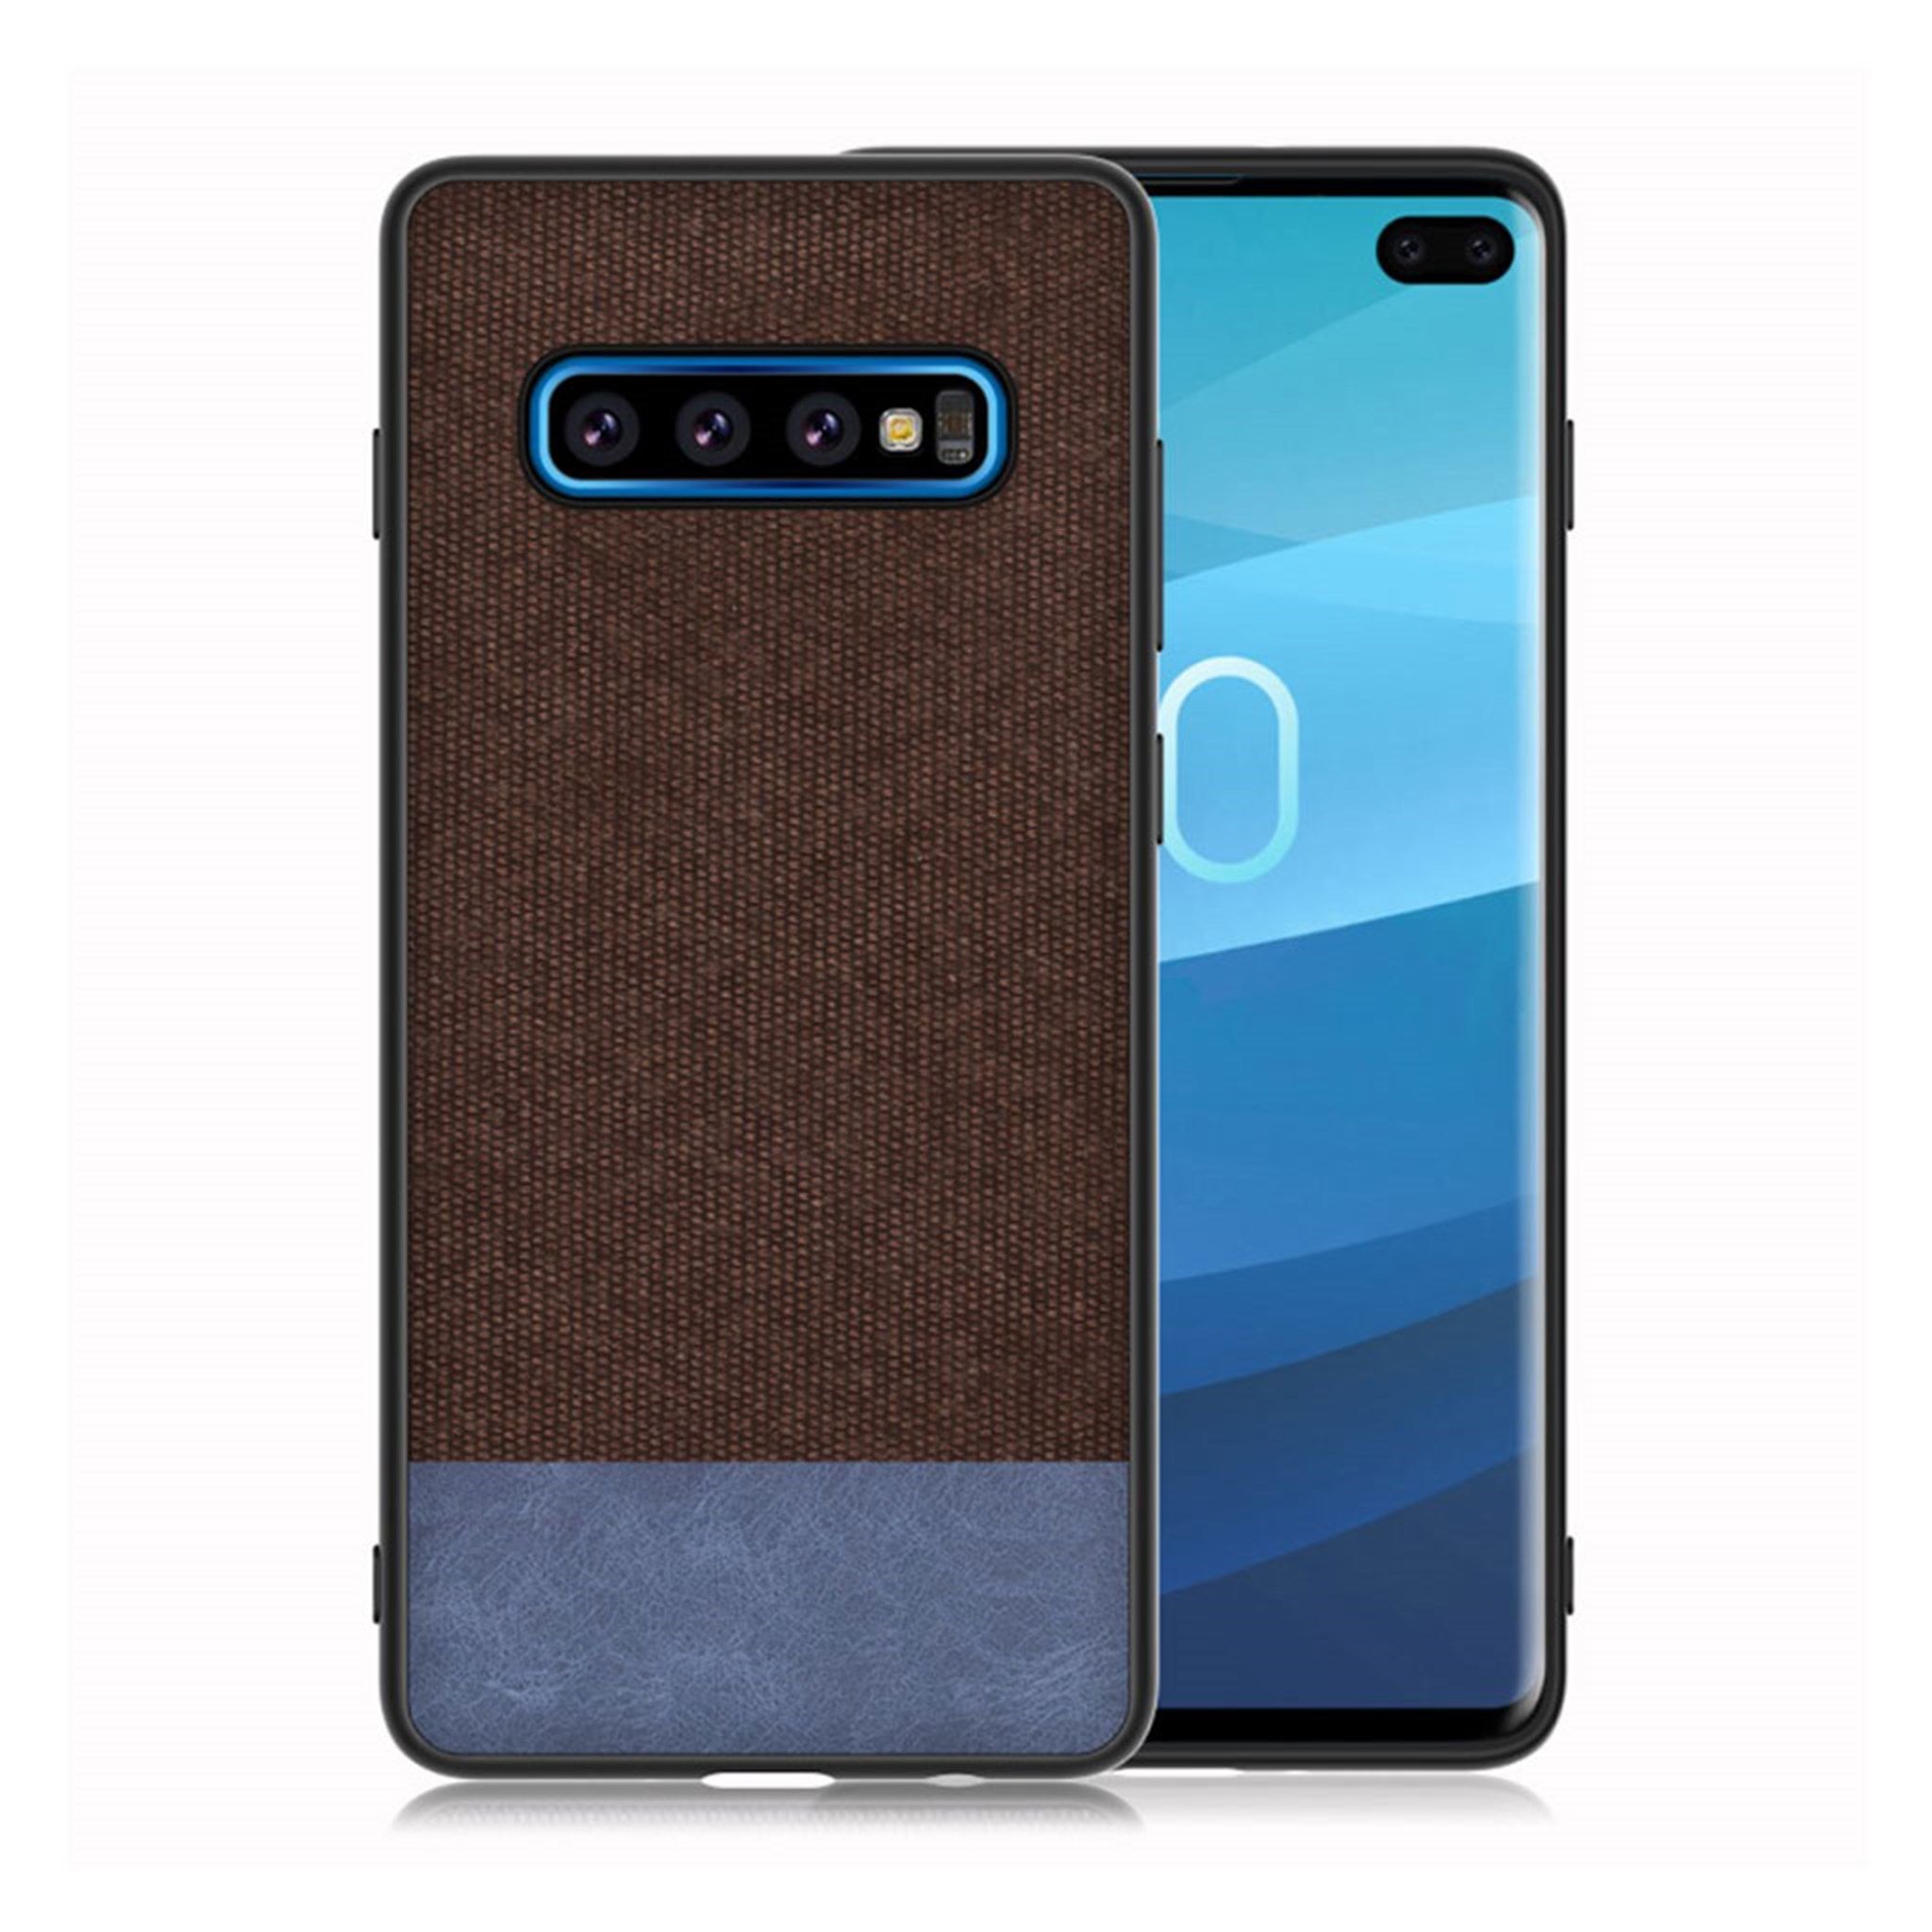 Samsung Galaxy S10 Plus cloth texture leather case - Coffee / Blue